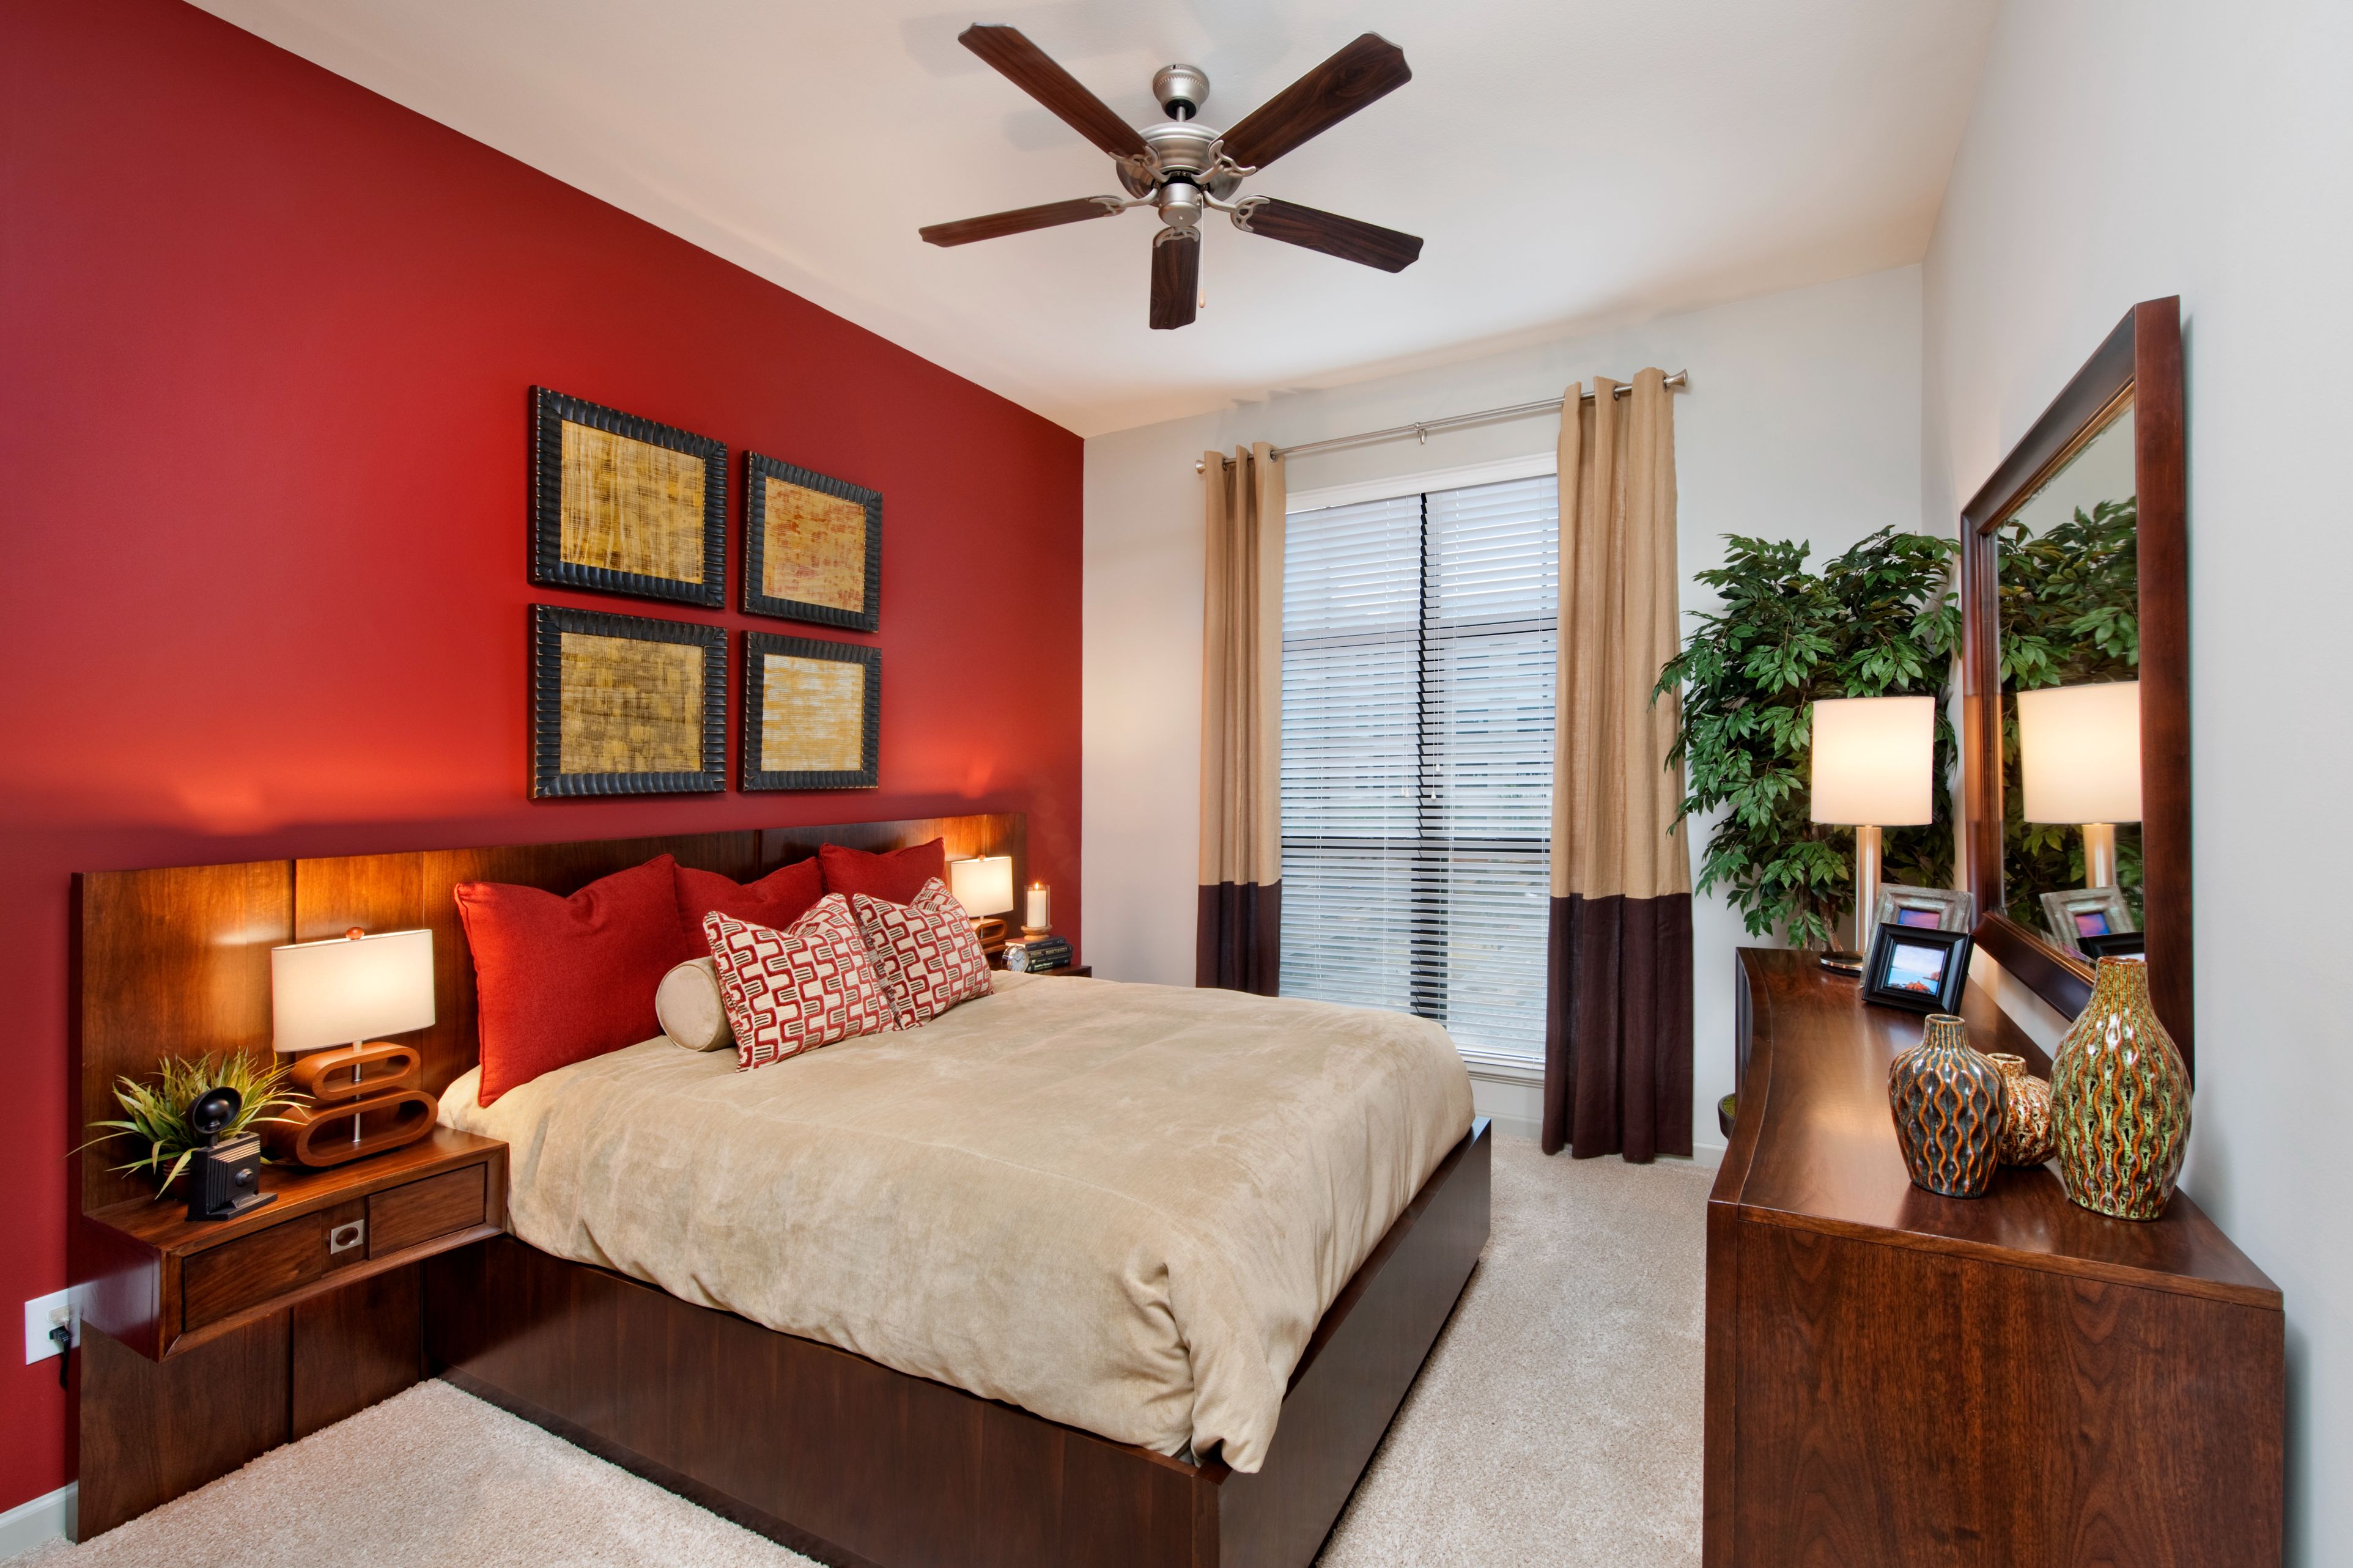 Professionally Designed Color Schemes at Brookleigh Flats Apartments in Brookhaven, GA